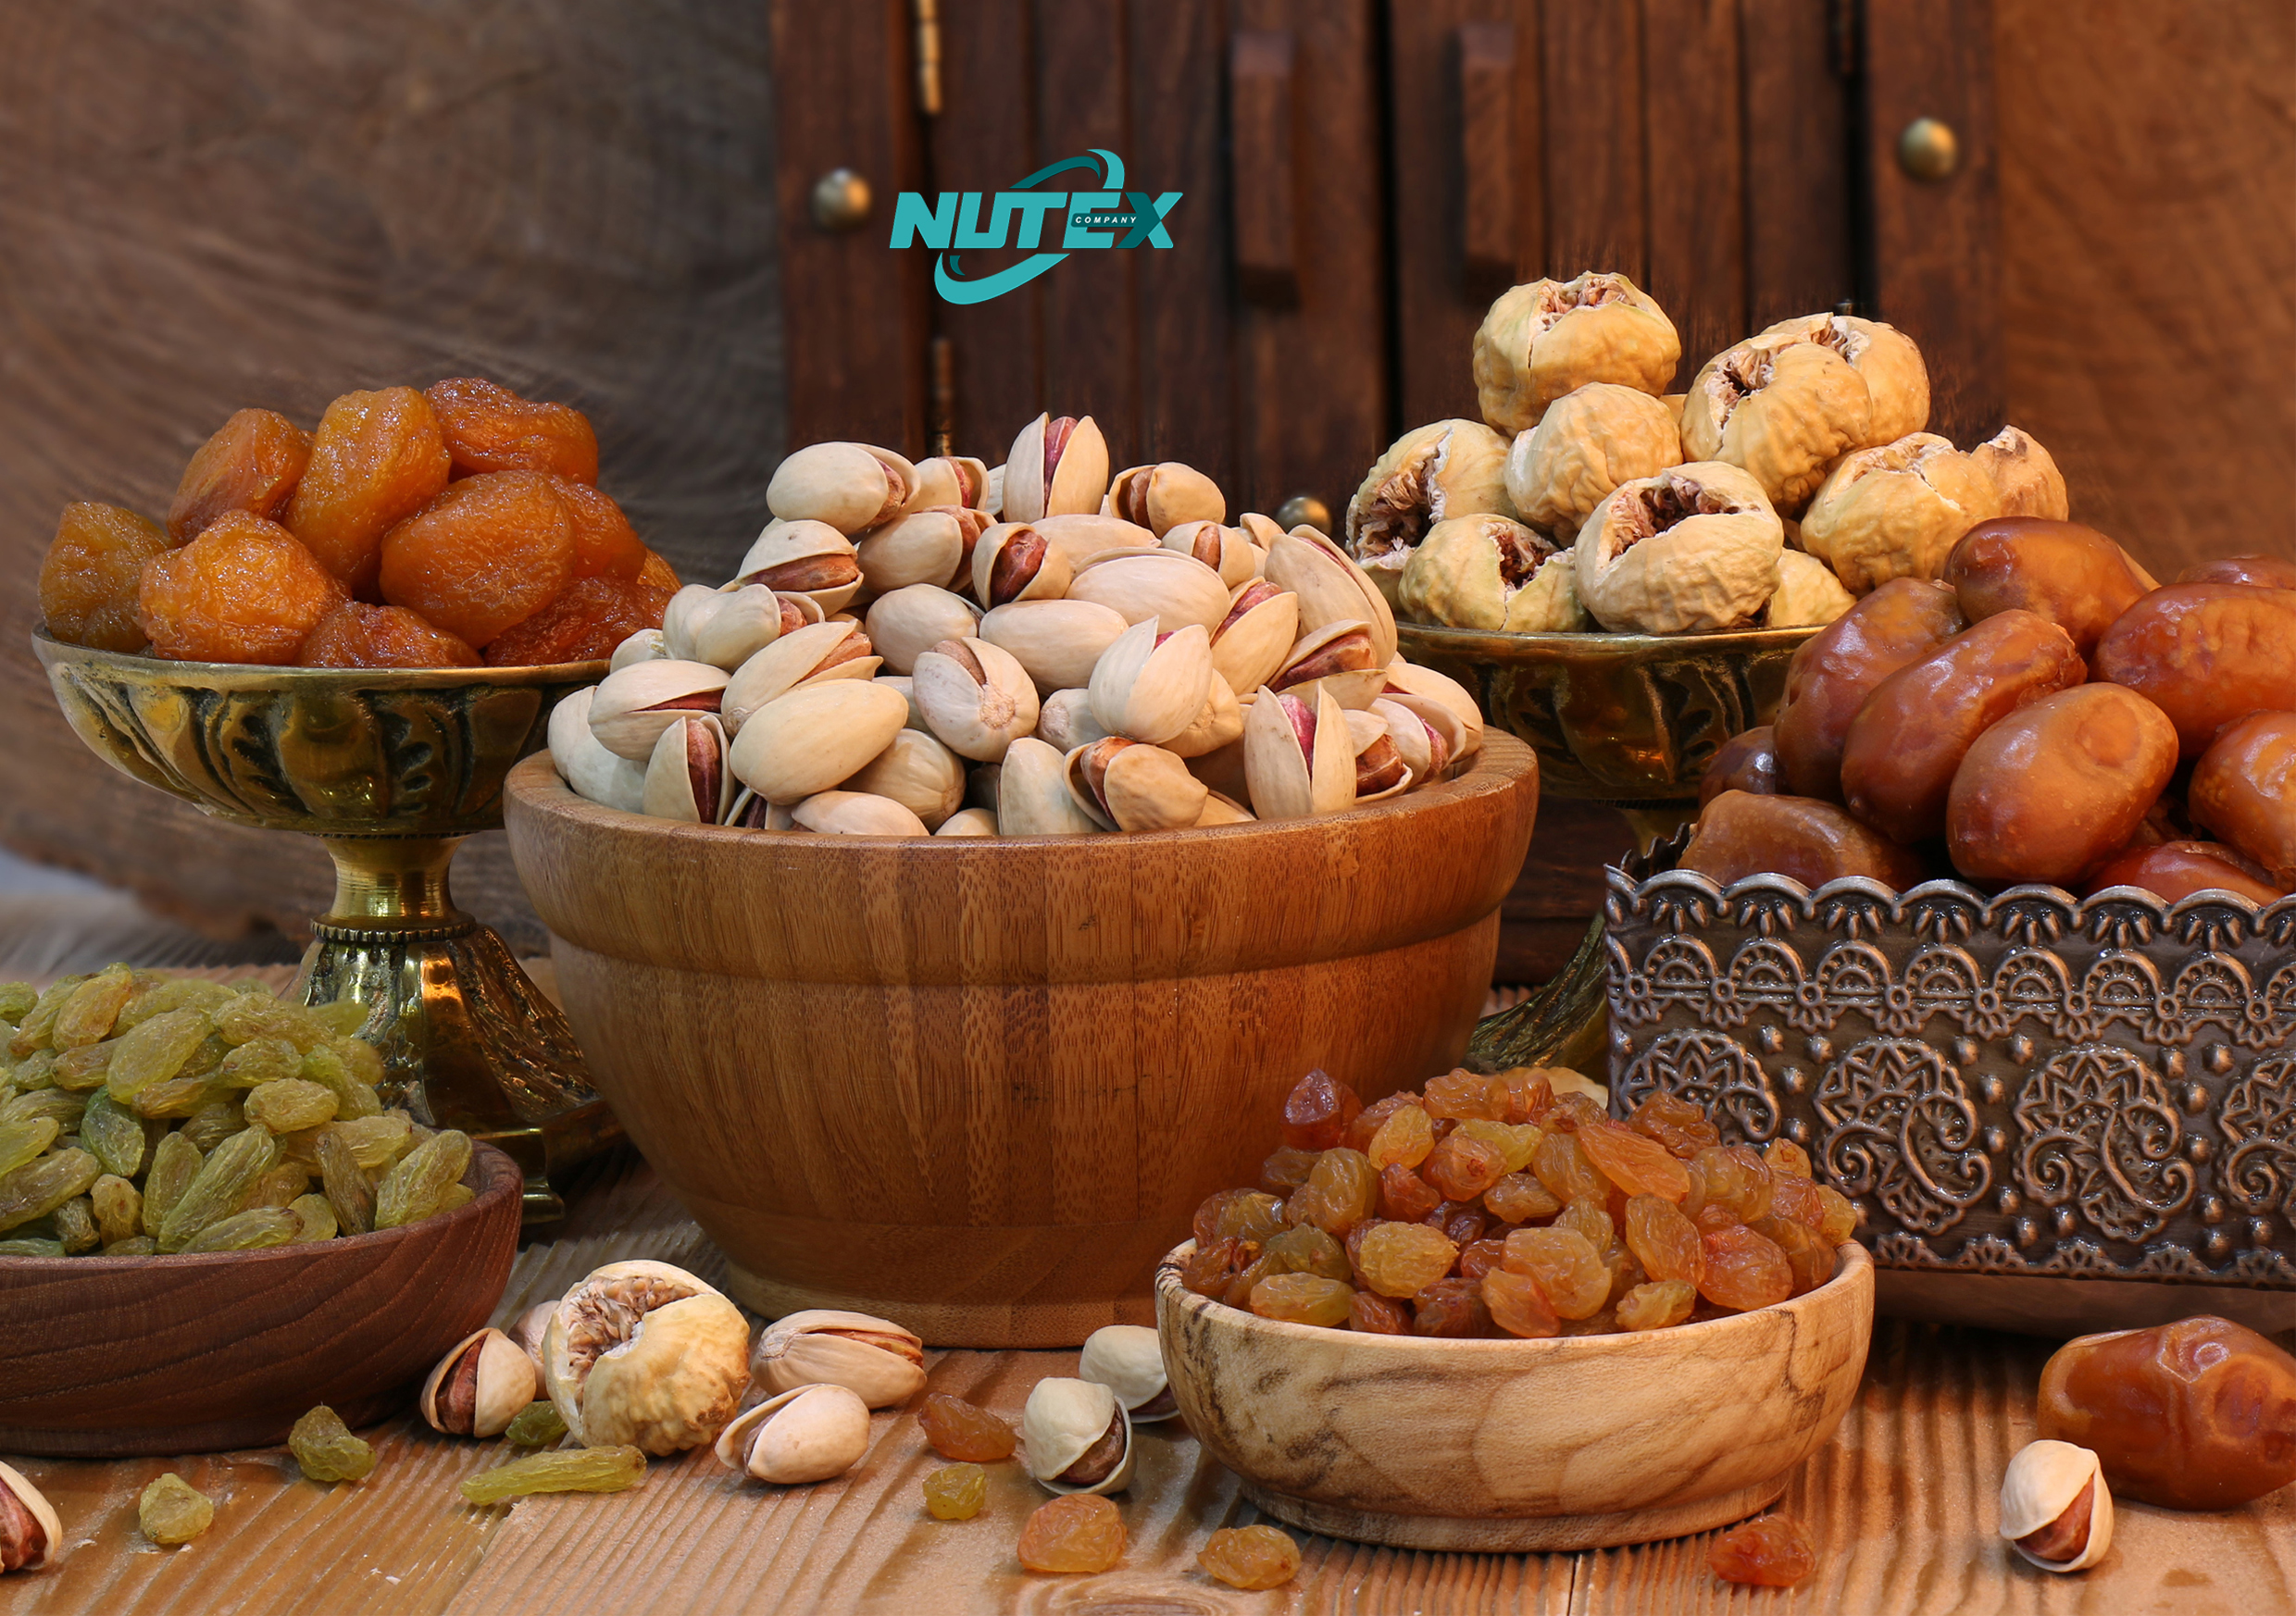 Wholesale & Export of Nuts and Dried Fruits From Iran _ Nutex Company